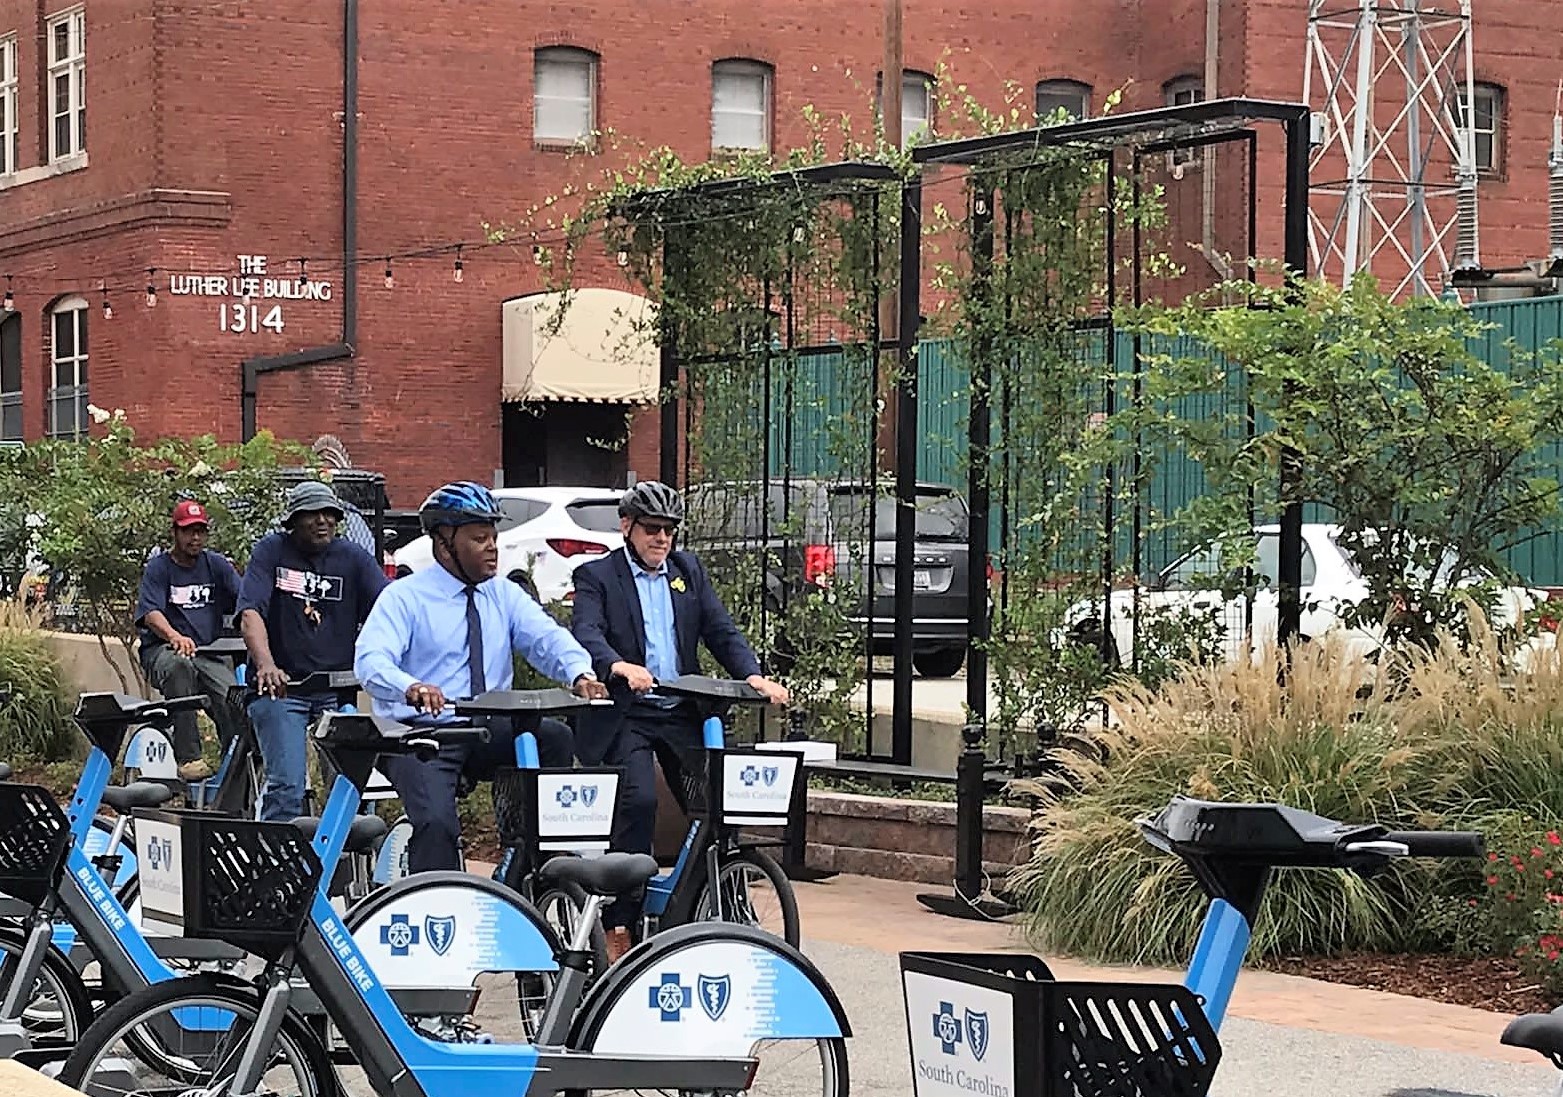 Columbia Mayor Steve Benjamin cycles to a news conference kicking off the city's new bike share program. (Photo/Provided)